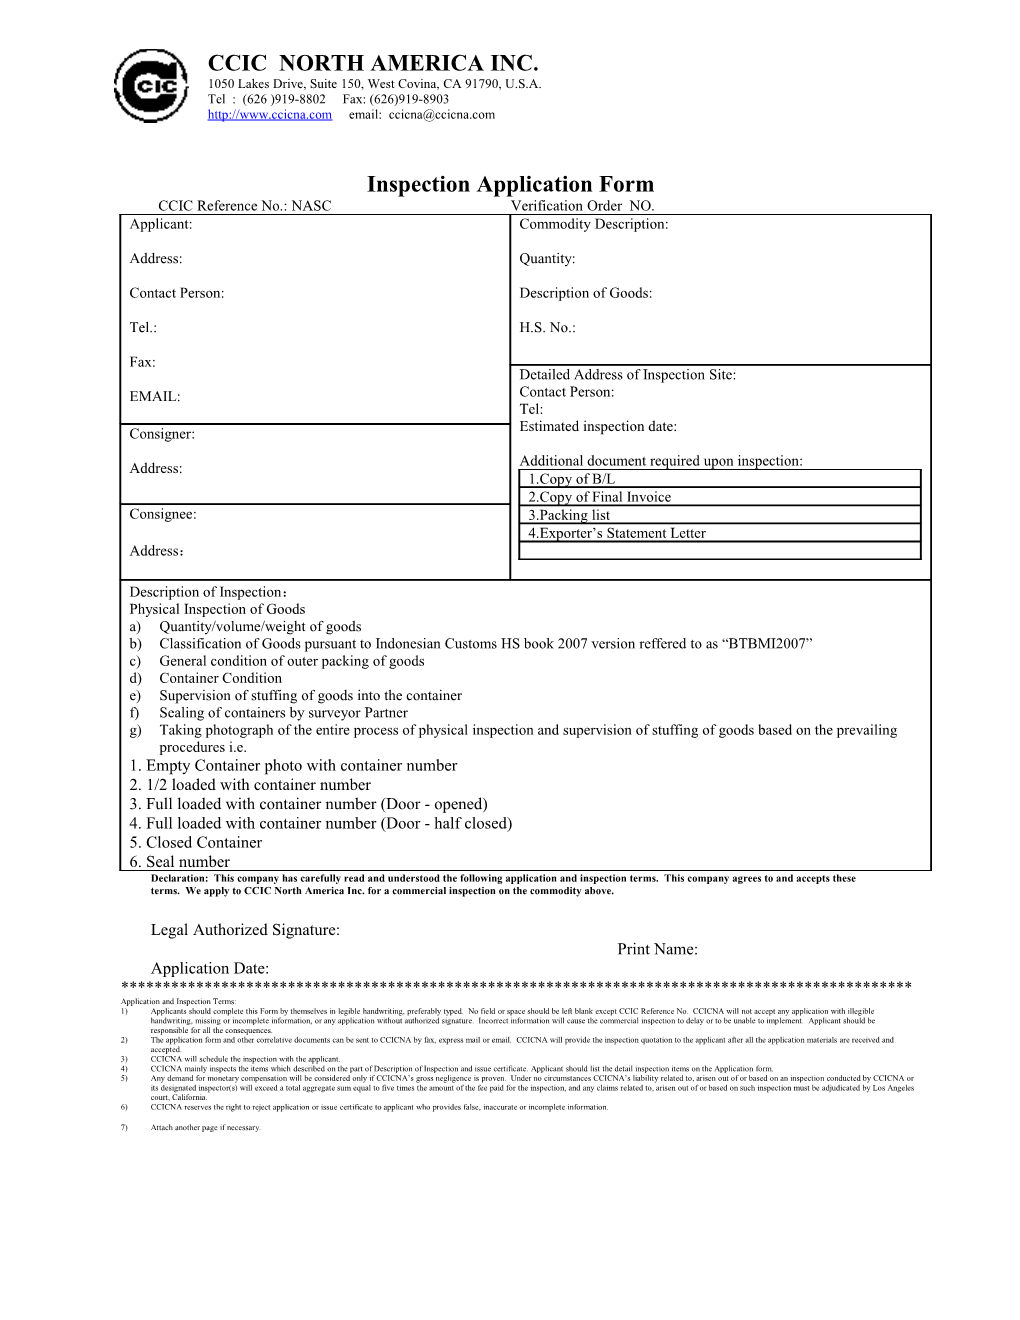 Inspection Application Form